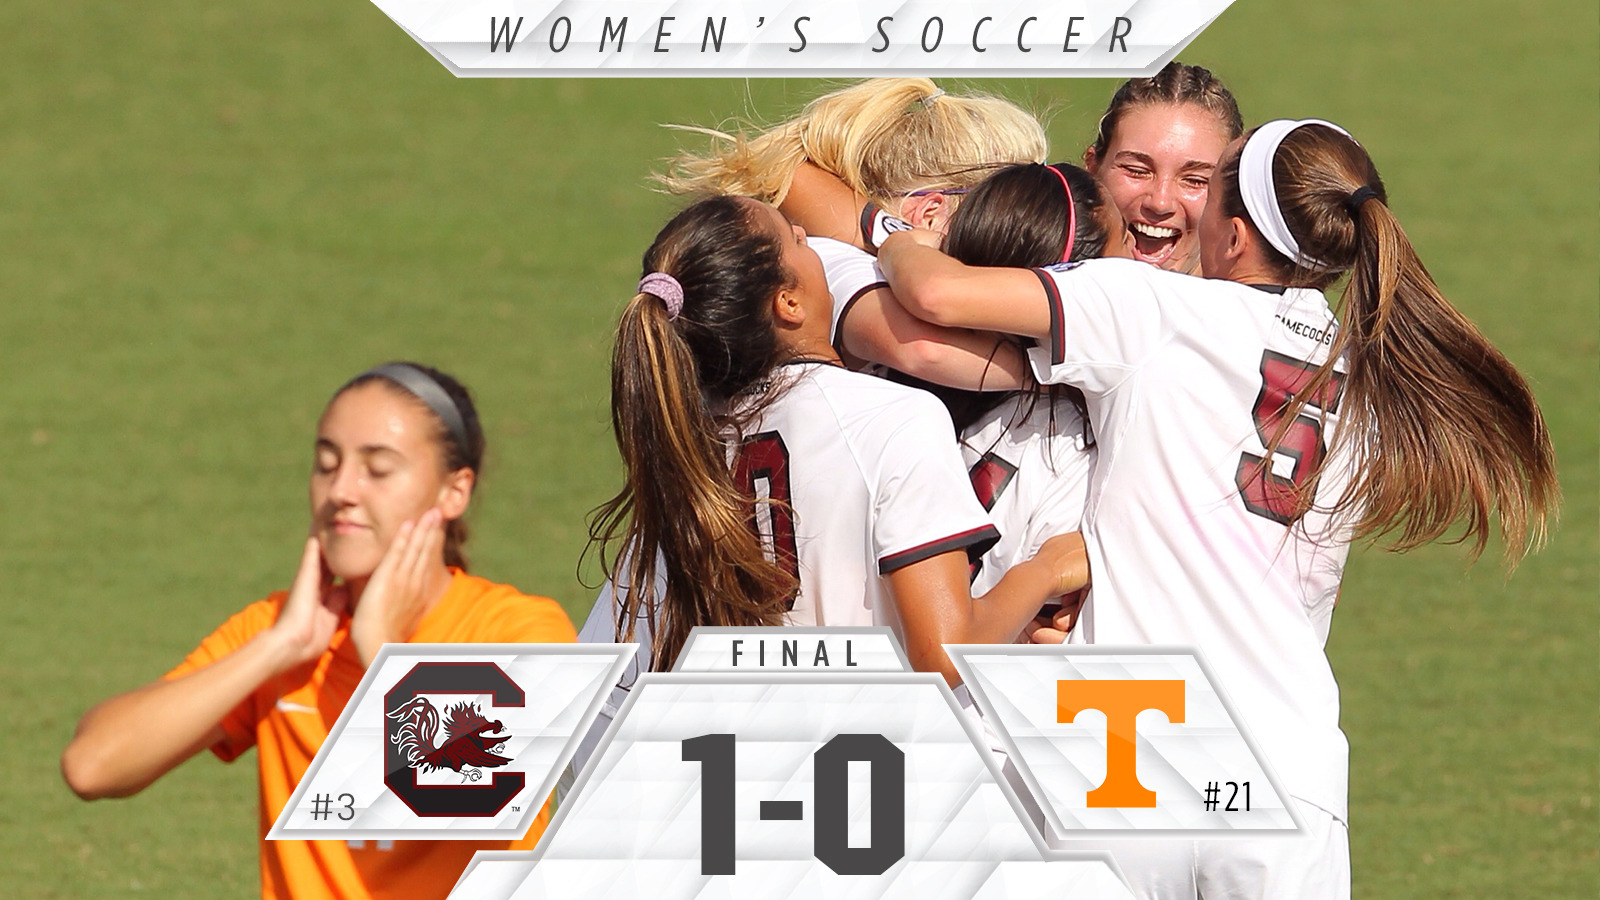 Chang's Overtime Game-Winner Pushes Gamecocks Past No. 21 Tennessee 1-0